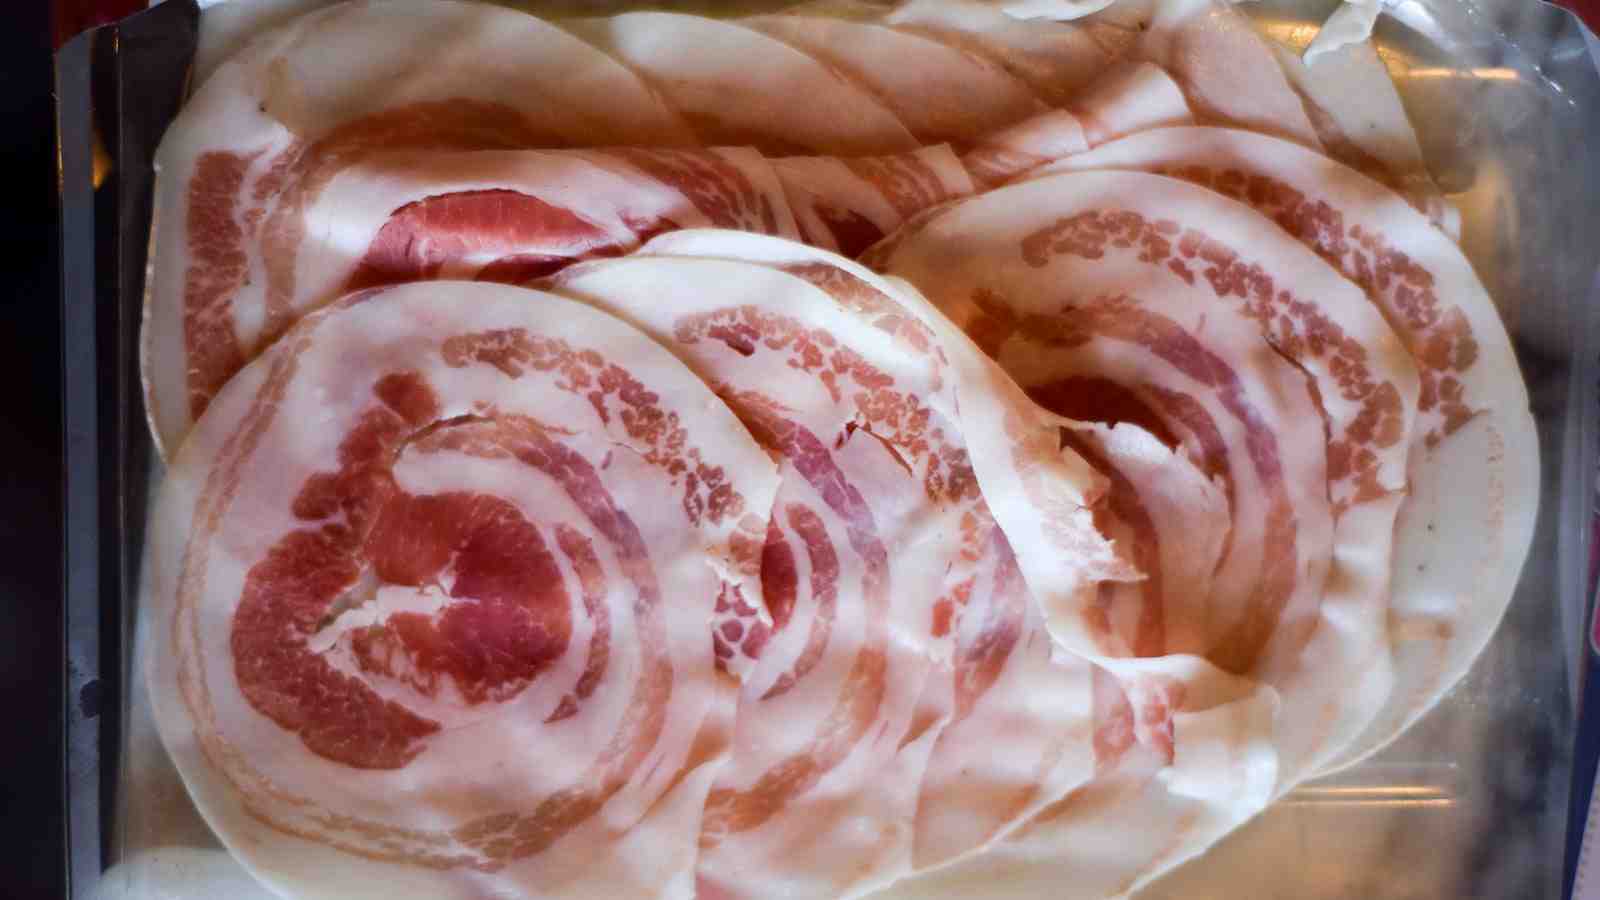 Does turkey bacon come from a pig?